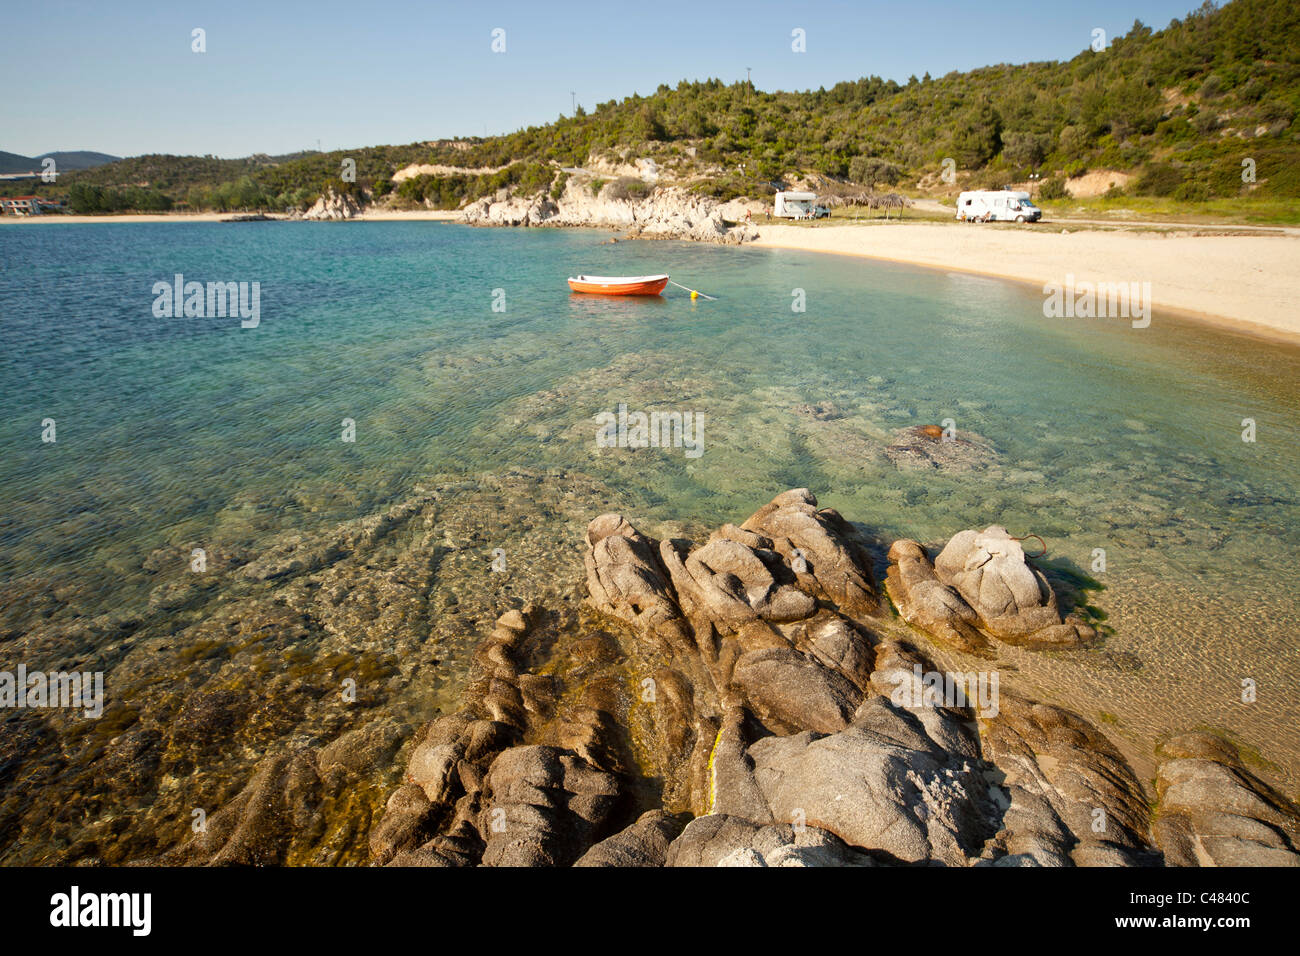 small bay with boat and Camper Mobile near Toroni, Sithonia, Chalkidiki, Greece Stock Photo